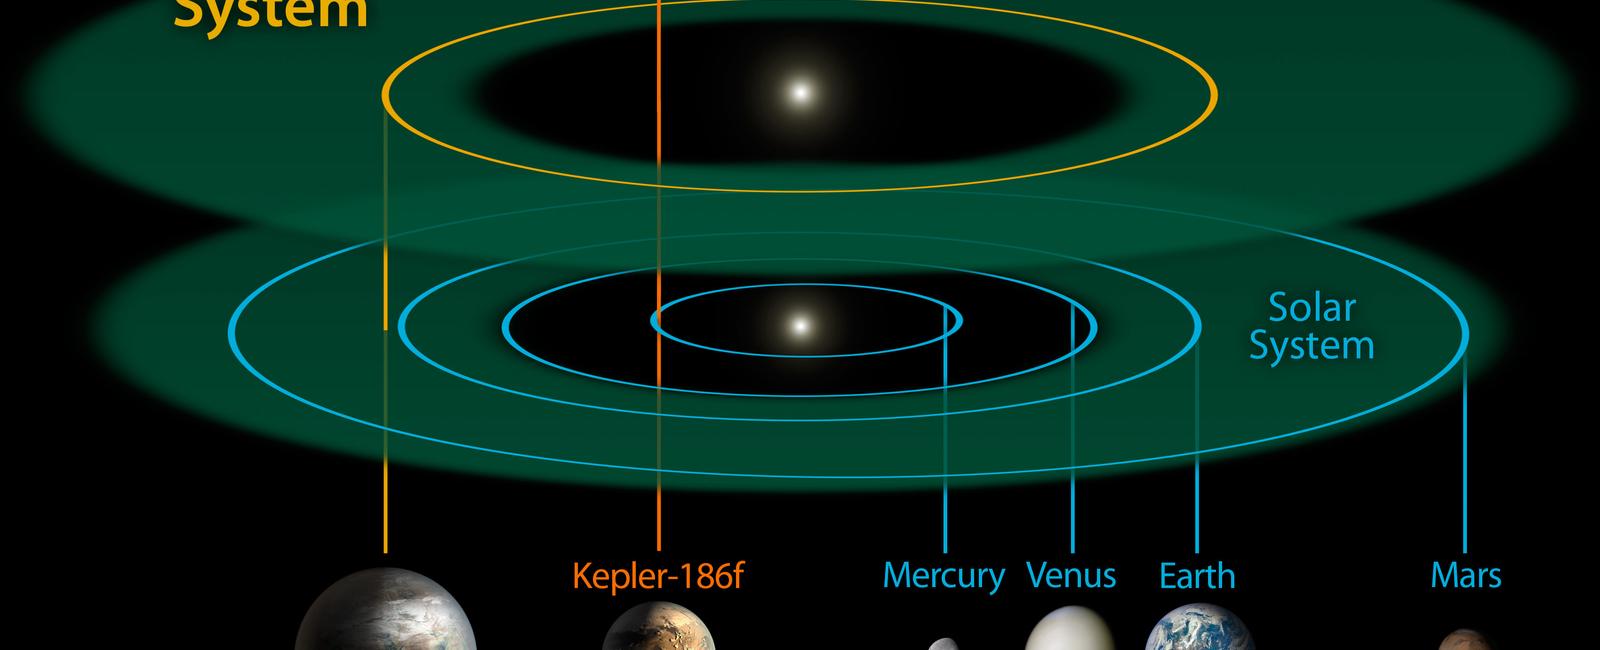 The kepler 90 star system has as many planets as our own solar system making us tied for the most planets revolving around a single star known so far